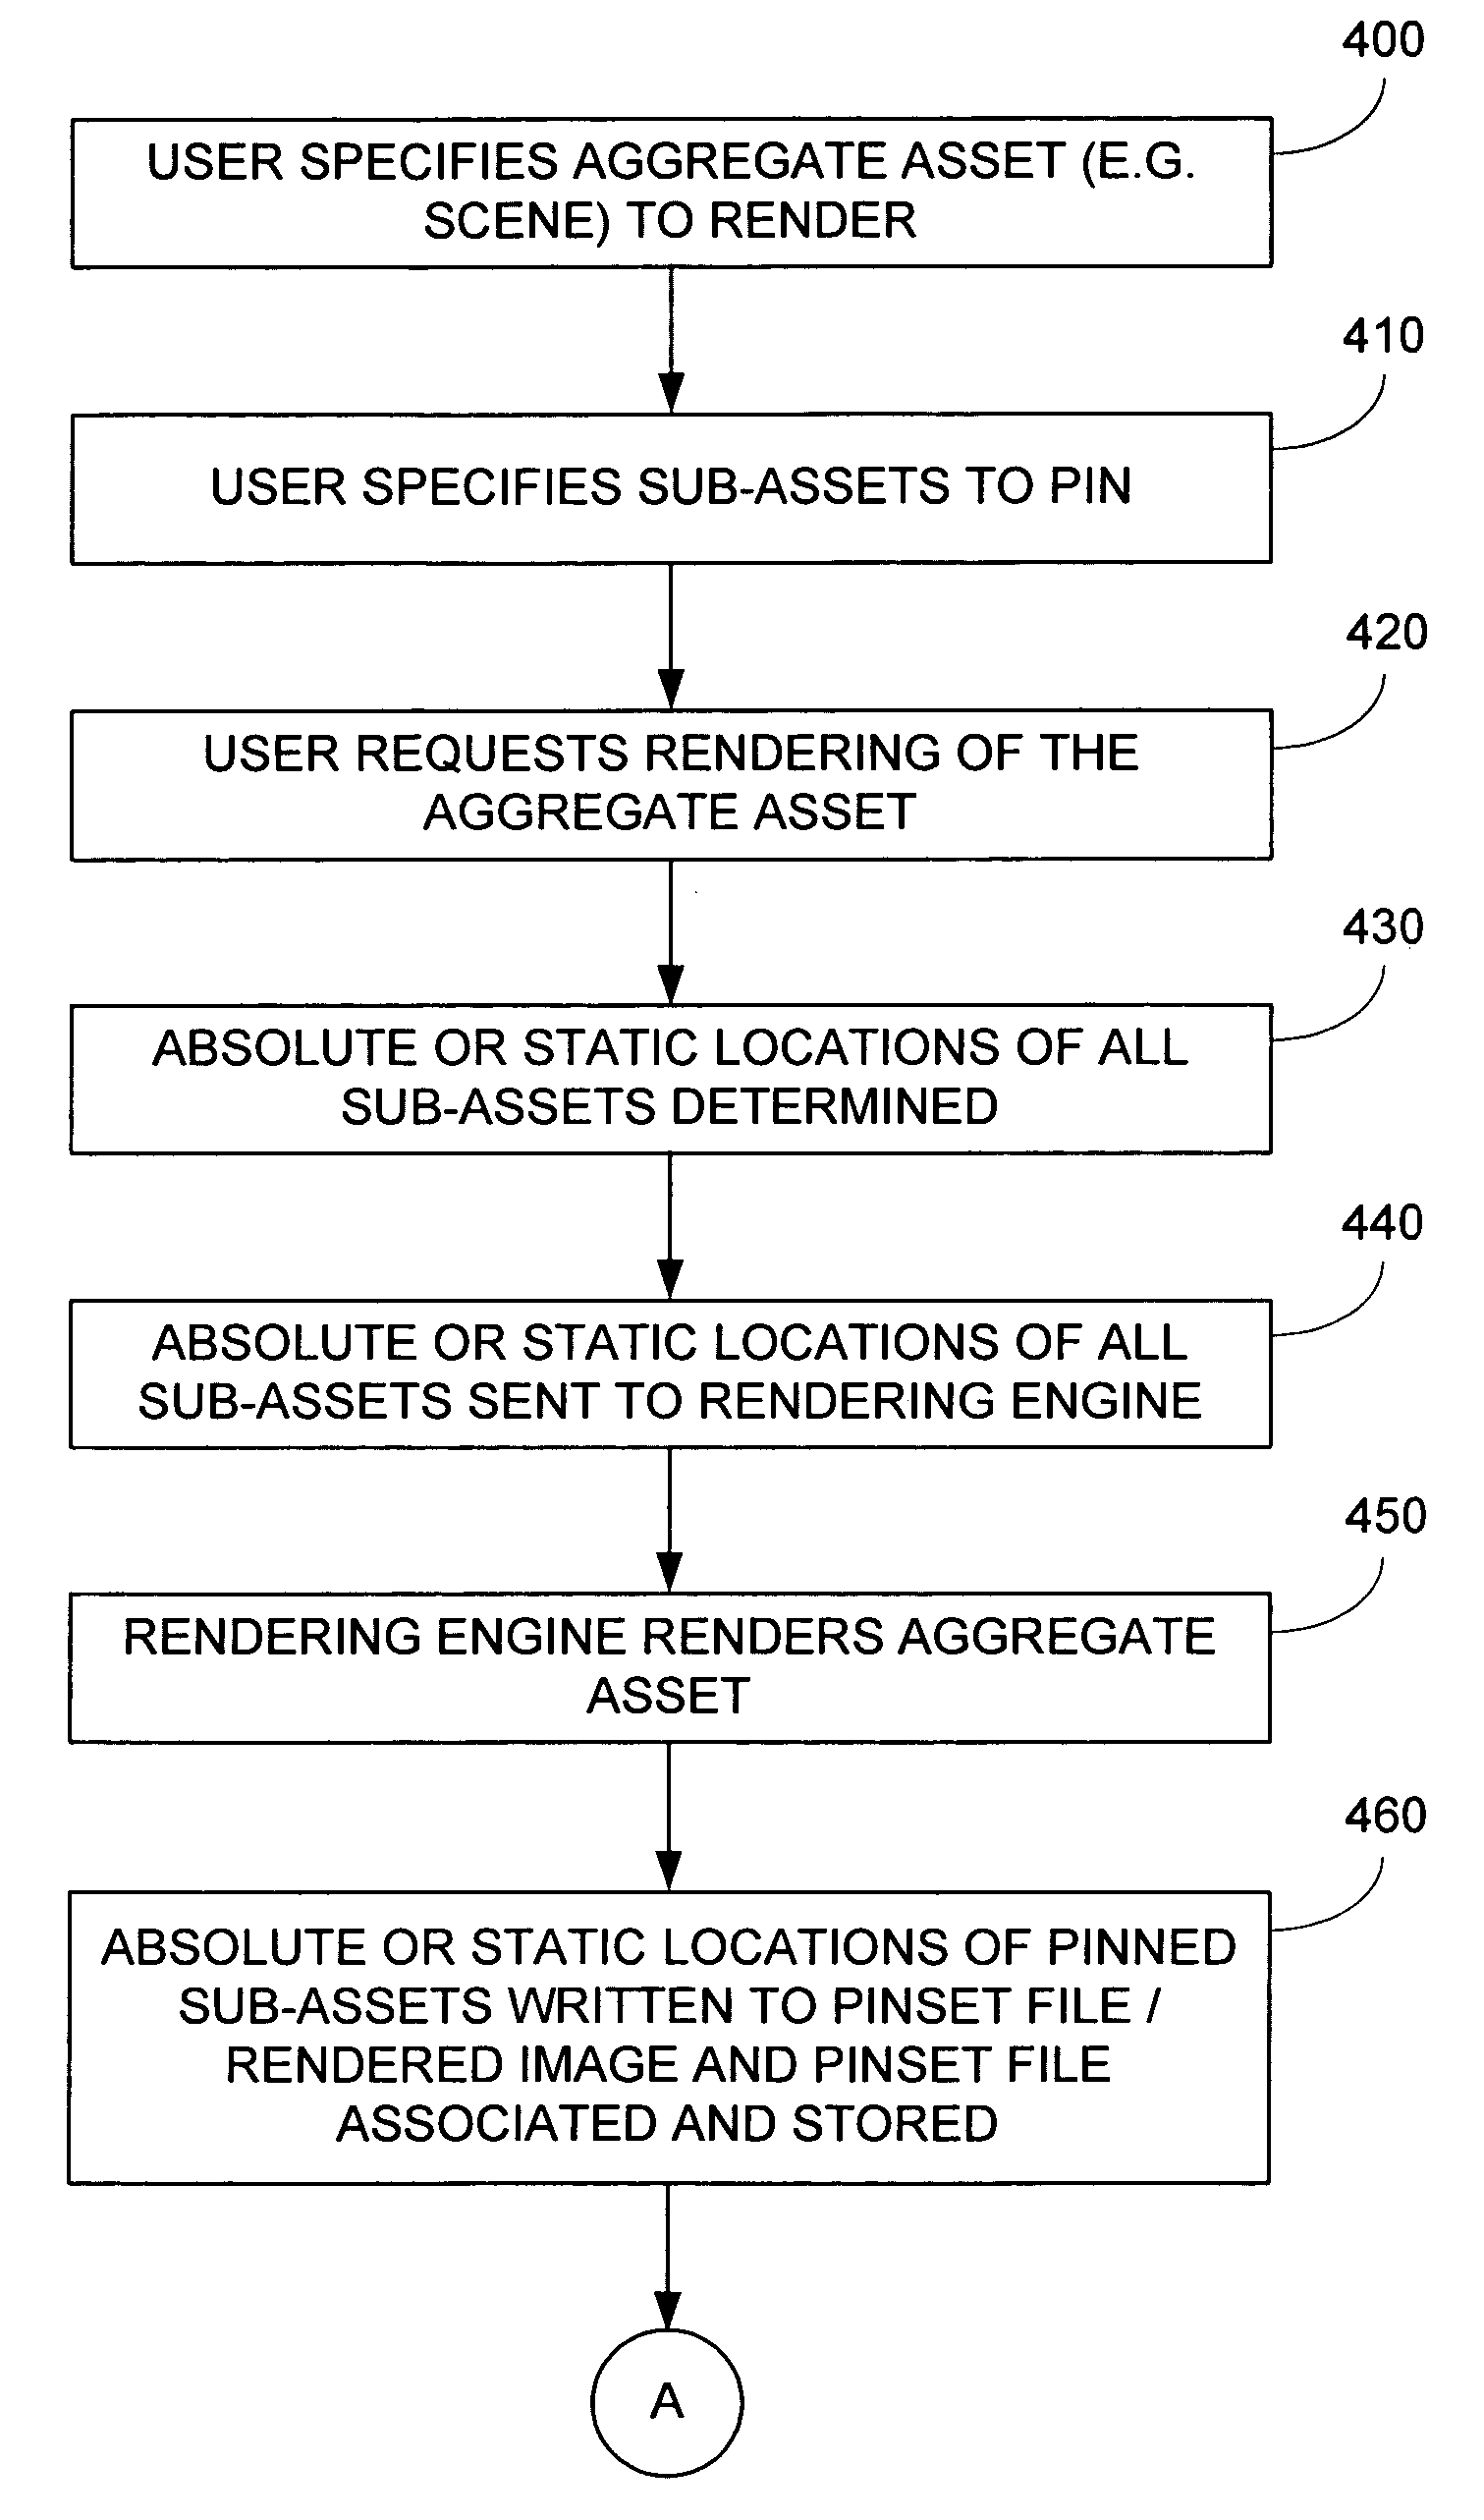 Automatic pre-render pinning of change isolated assets methods and apparatus